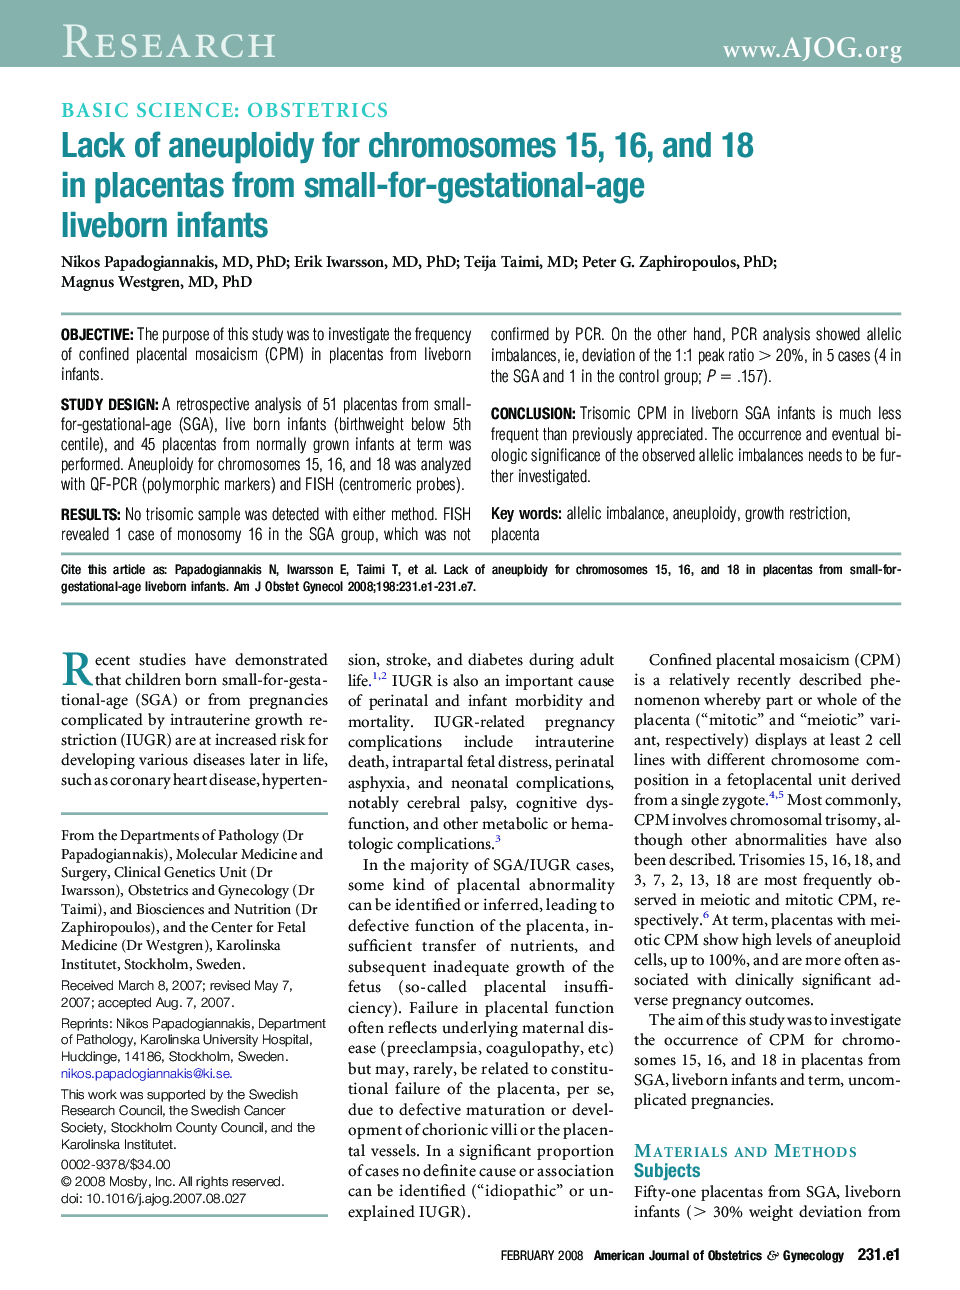 Lack of aneuploidy for chromosomes 15, 16, and 18 in placentas from small-for-gestational-age liveborn infants